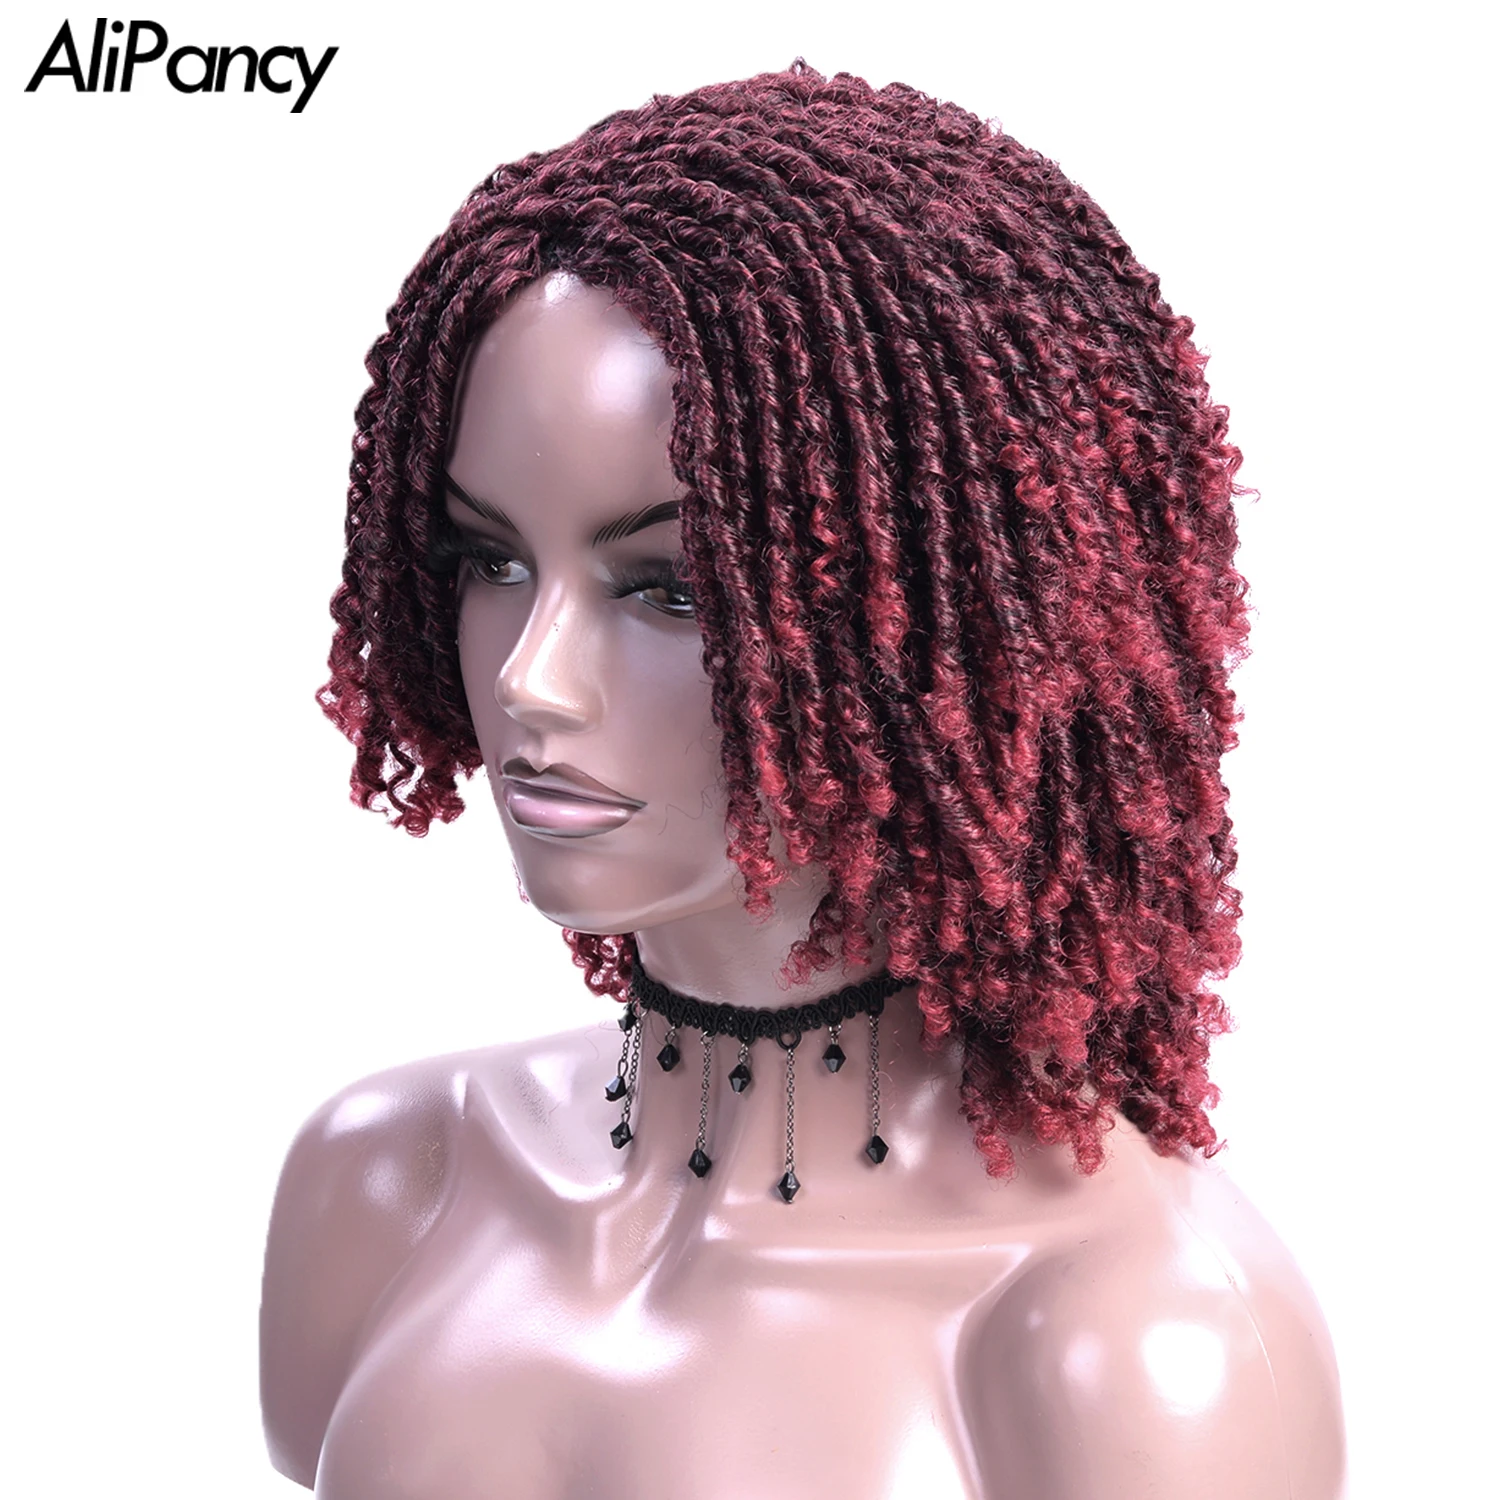 

8inch Dreadlock Wig For Women Synthetic Curly Ombre Braided Wigs With Bangs African Faux Locs Crochet Twist Hair Short Wigs